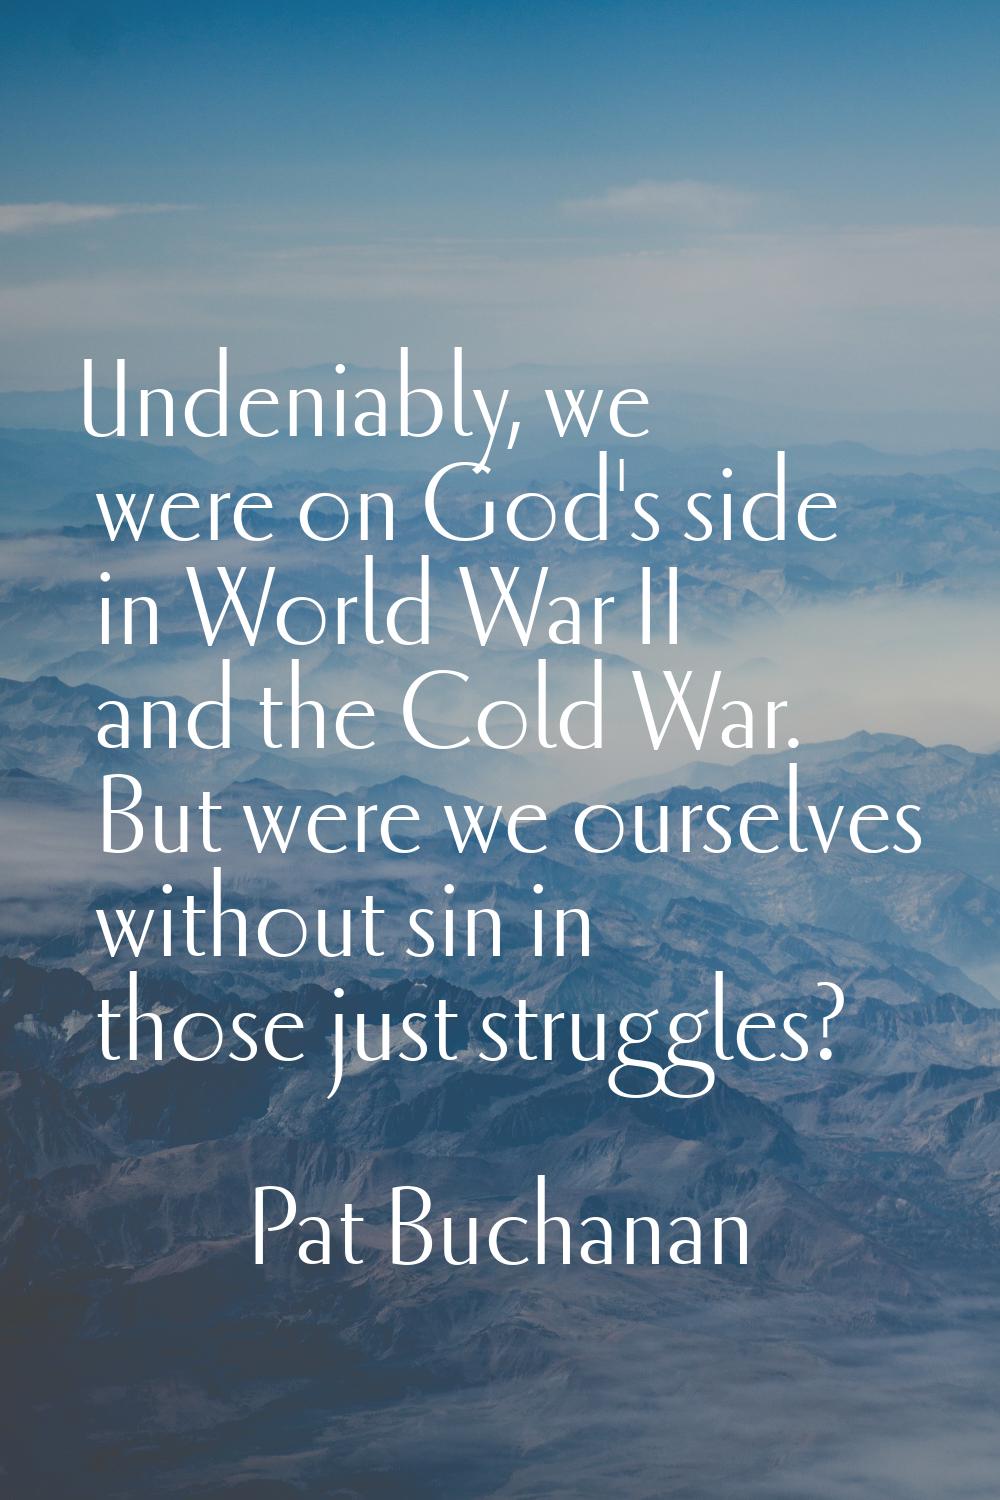 Undeniably, we were on God's side in World War II and the Cold War. But were we ourselves without s